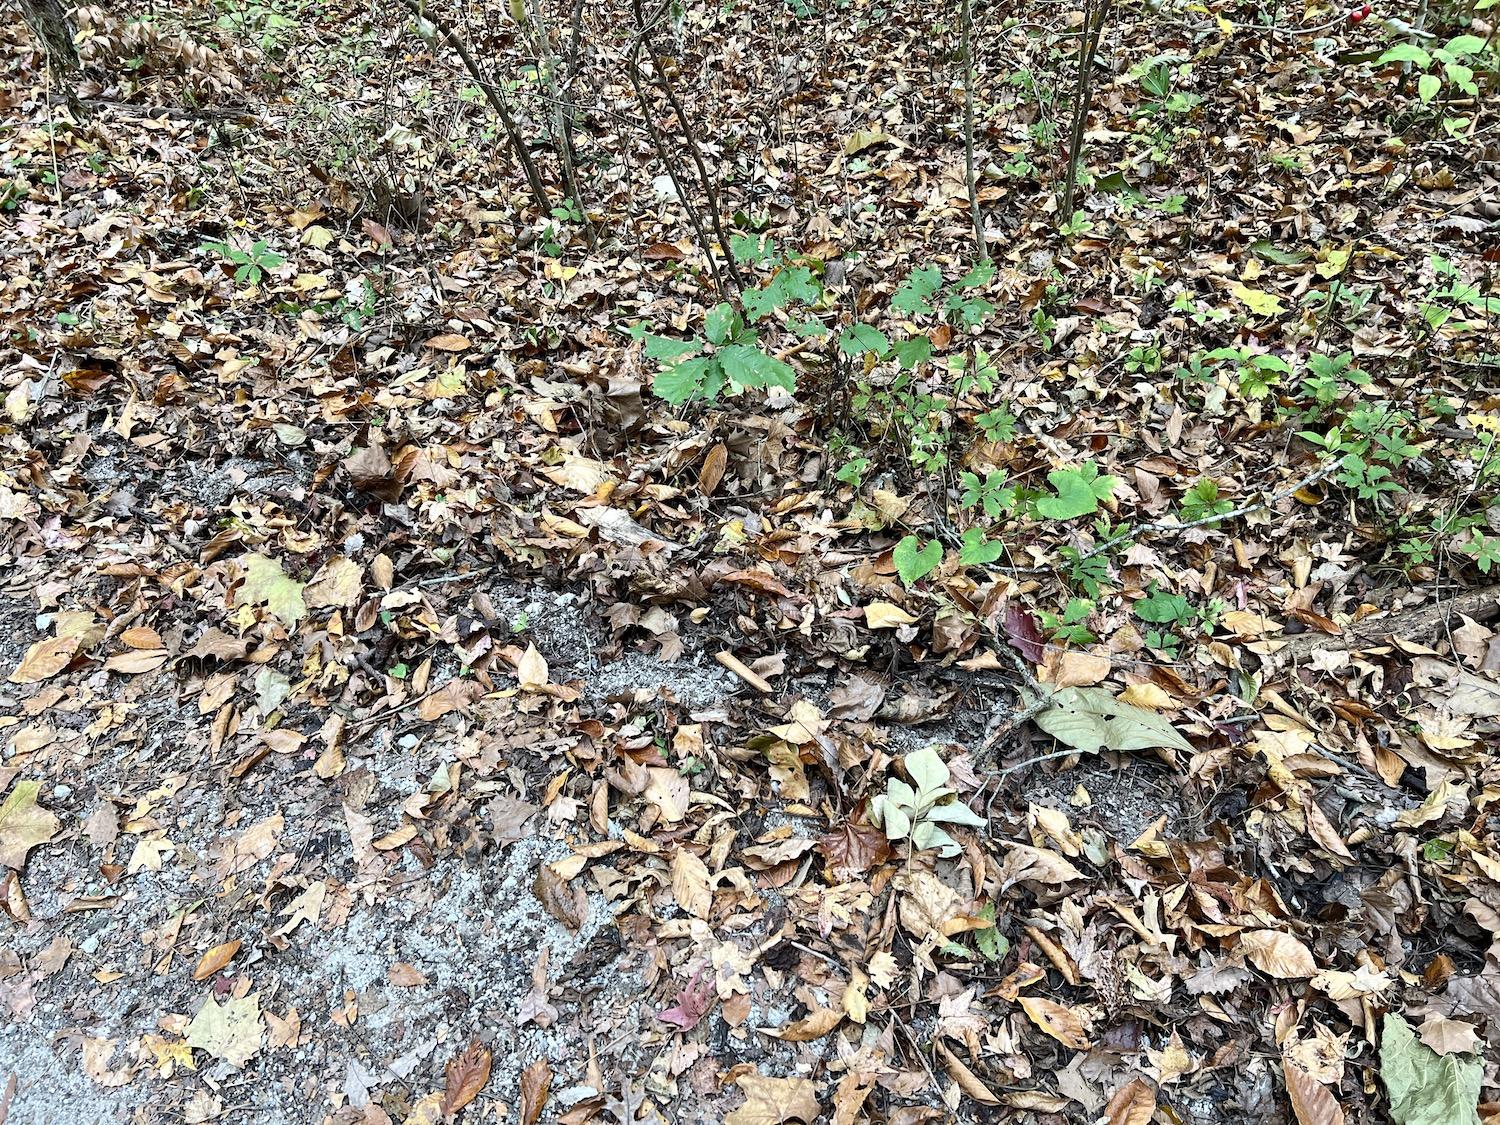 These grooves along the edge of Lost Valley Trail are likely evidence of feral hogs rooting through the decaying leaves for food.